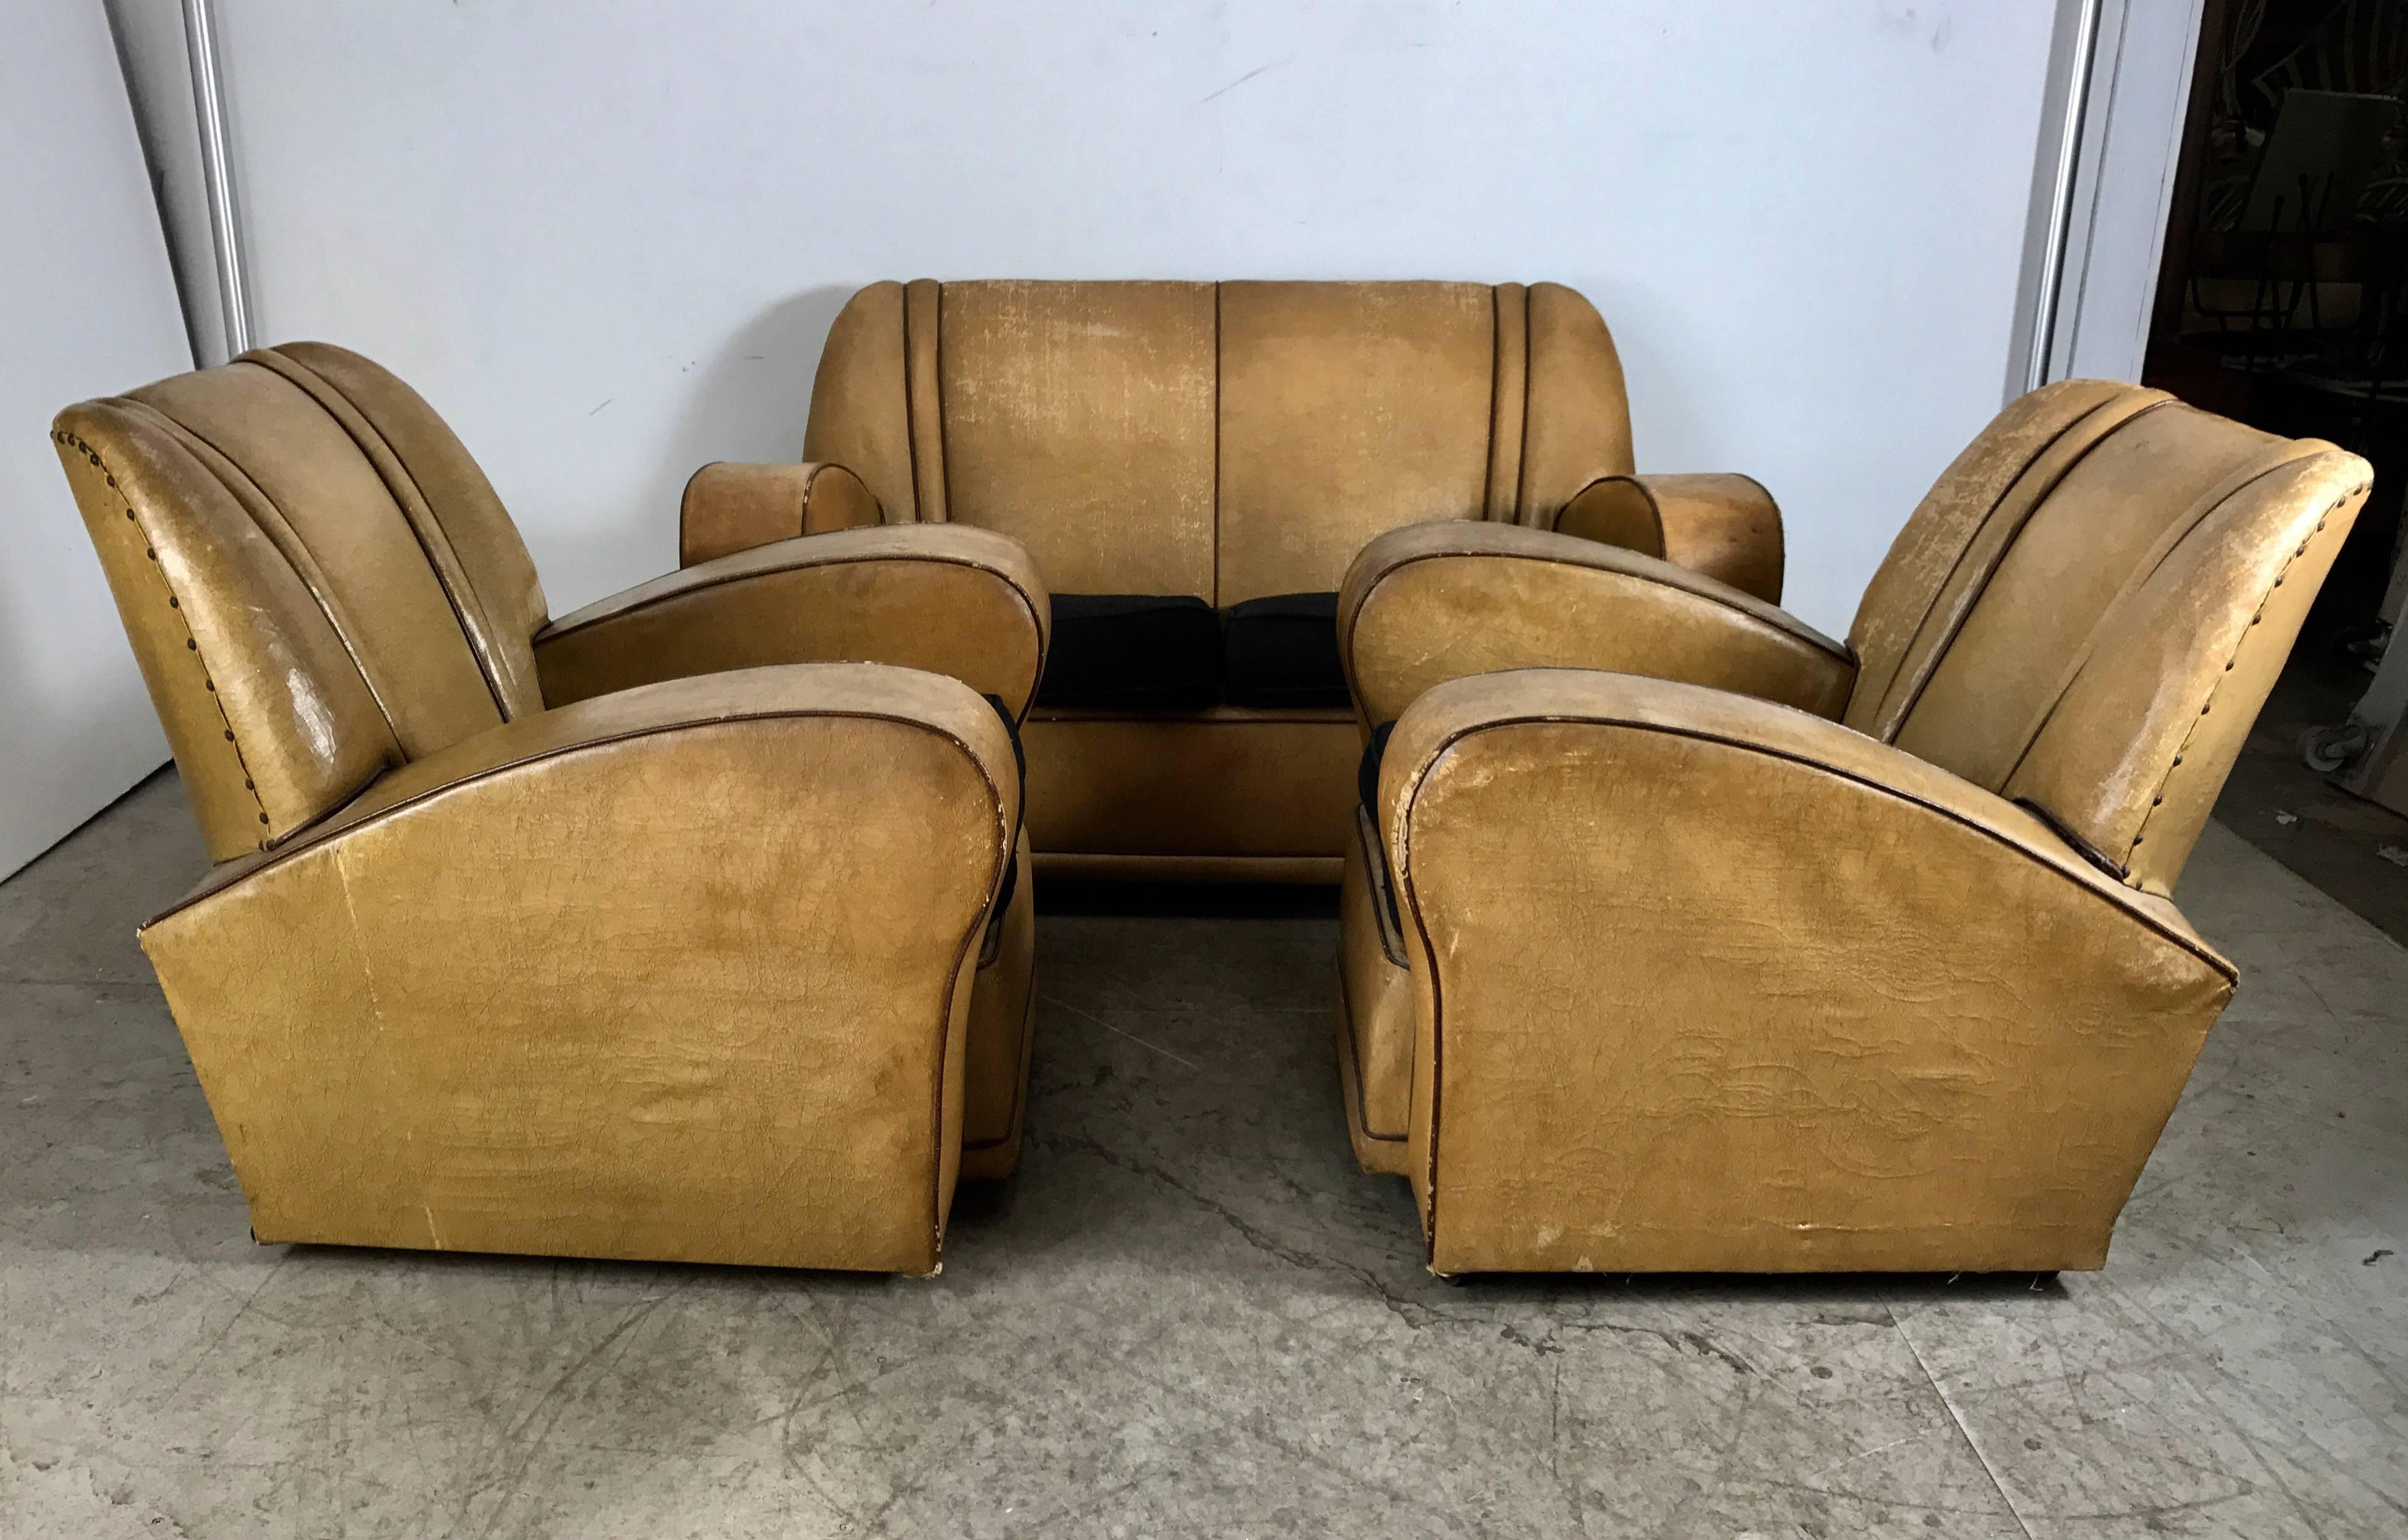 Stunning three-piece European Art Deco suite, matching sofa and two club Chairs. Classic streamline deco .Amazing design, retains original oil cloth shell. Fabric cushions, Superior quality and construction, extremely comfortable, selling in